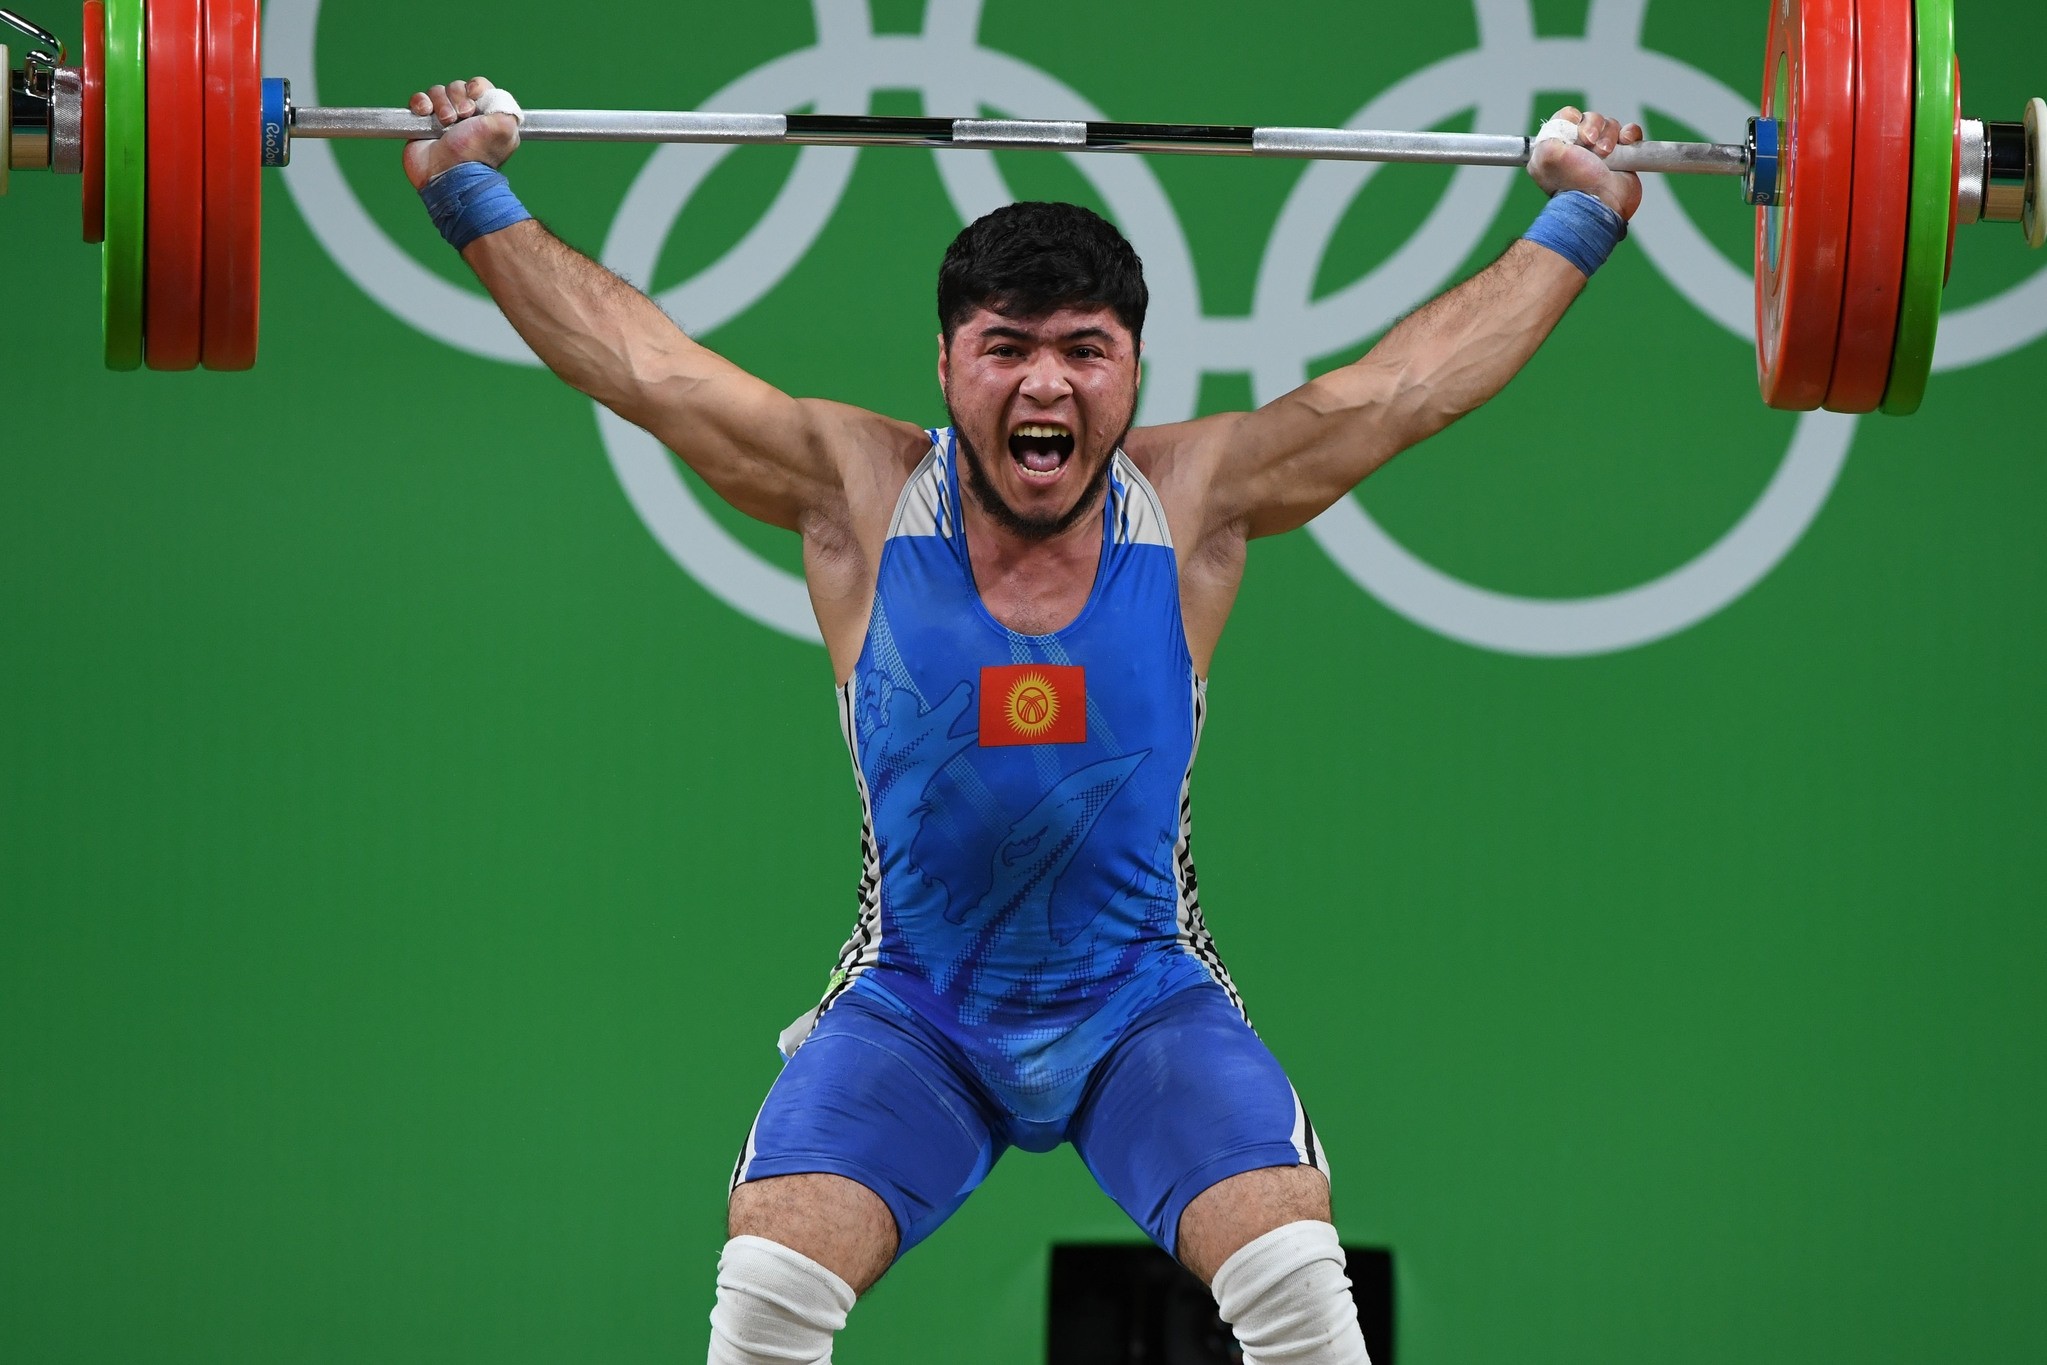 Picture taken on August 9,2016 shows Kirghyzstan's Izzat Artykov competing during the Men's 69kg weightlifting competition at the Rio 2016 Olympic Games in Rio de Janeiro on August 9, 2016. (AFP Photo)